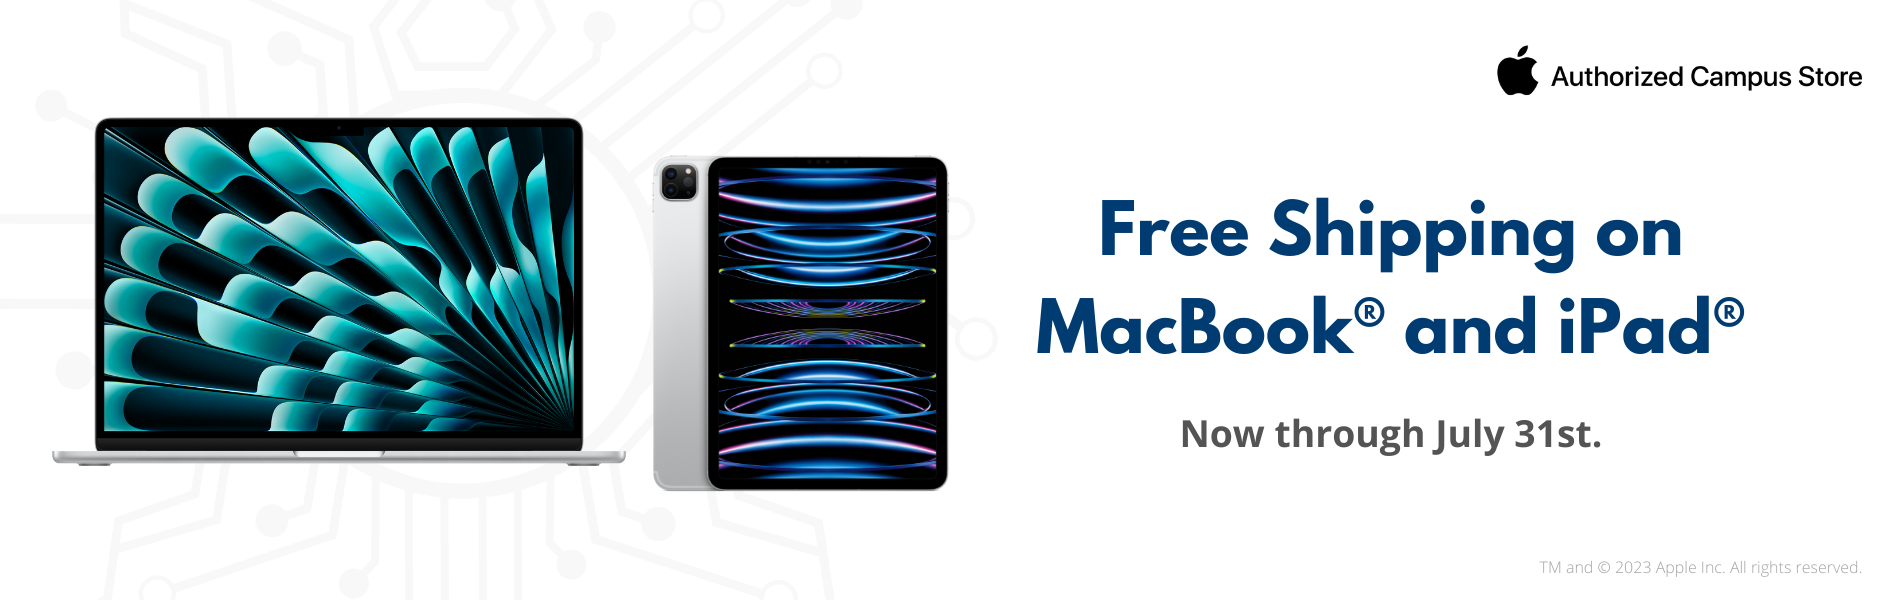 Free Shipping All Month on Mac and iPad!